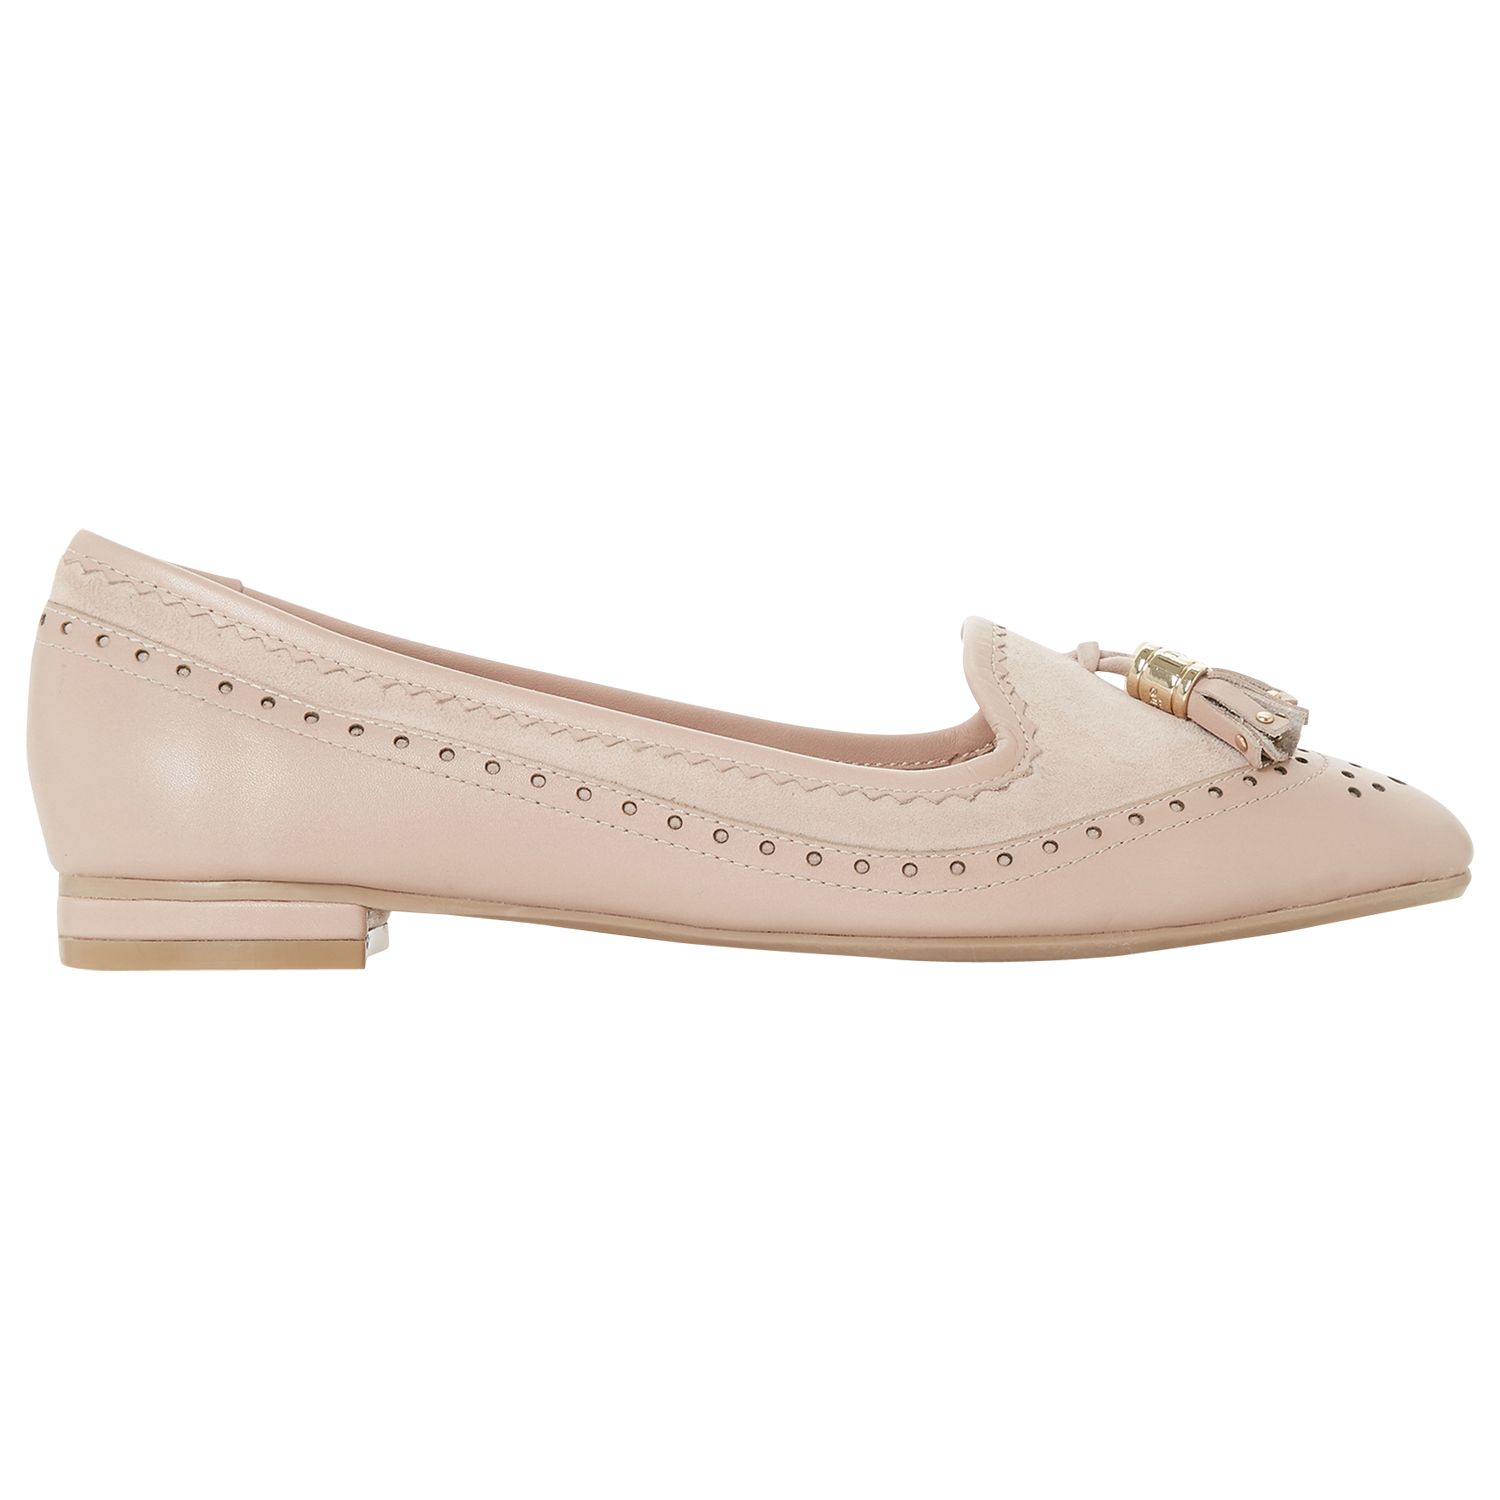 Dune Gambie Leather Loafers, Blush, 4